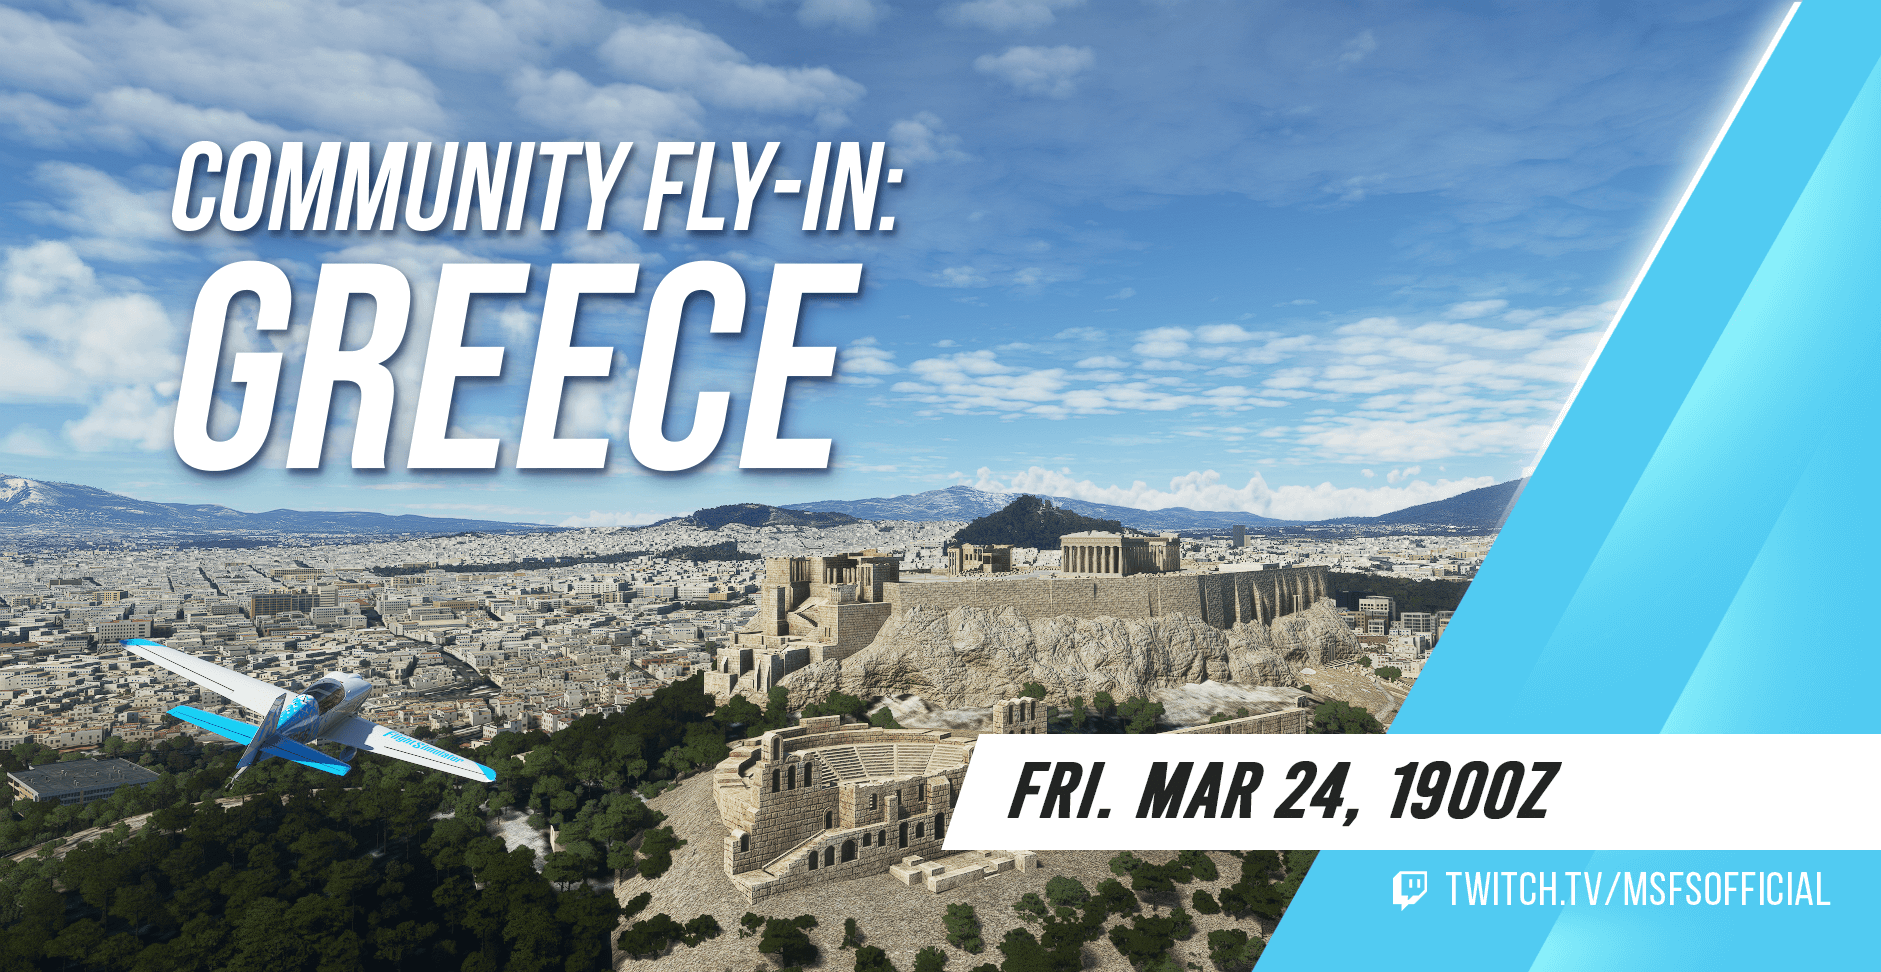 A white and blue aircraft flies towards the Acropolis in Athens. Community Fly-In: Greece. Join us on March 24th at 1900Z on twitch.tv/msfsofficial!